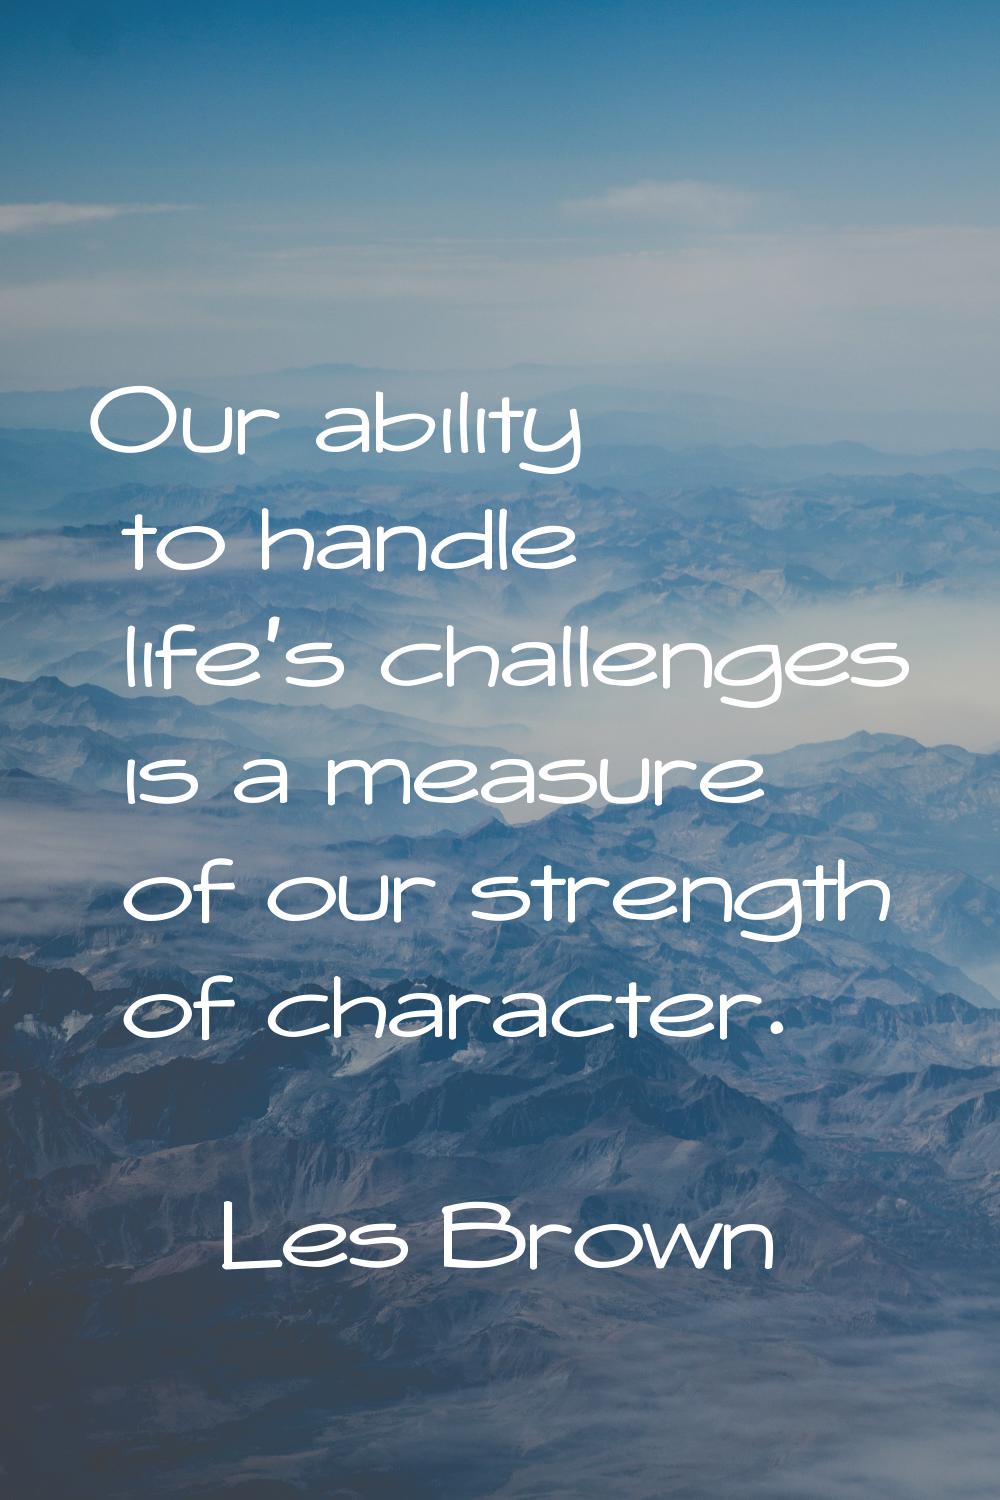 Our ability to handle life's challenges is a measure of our strength of character.